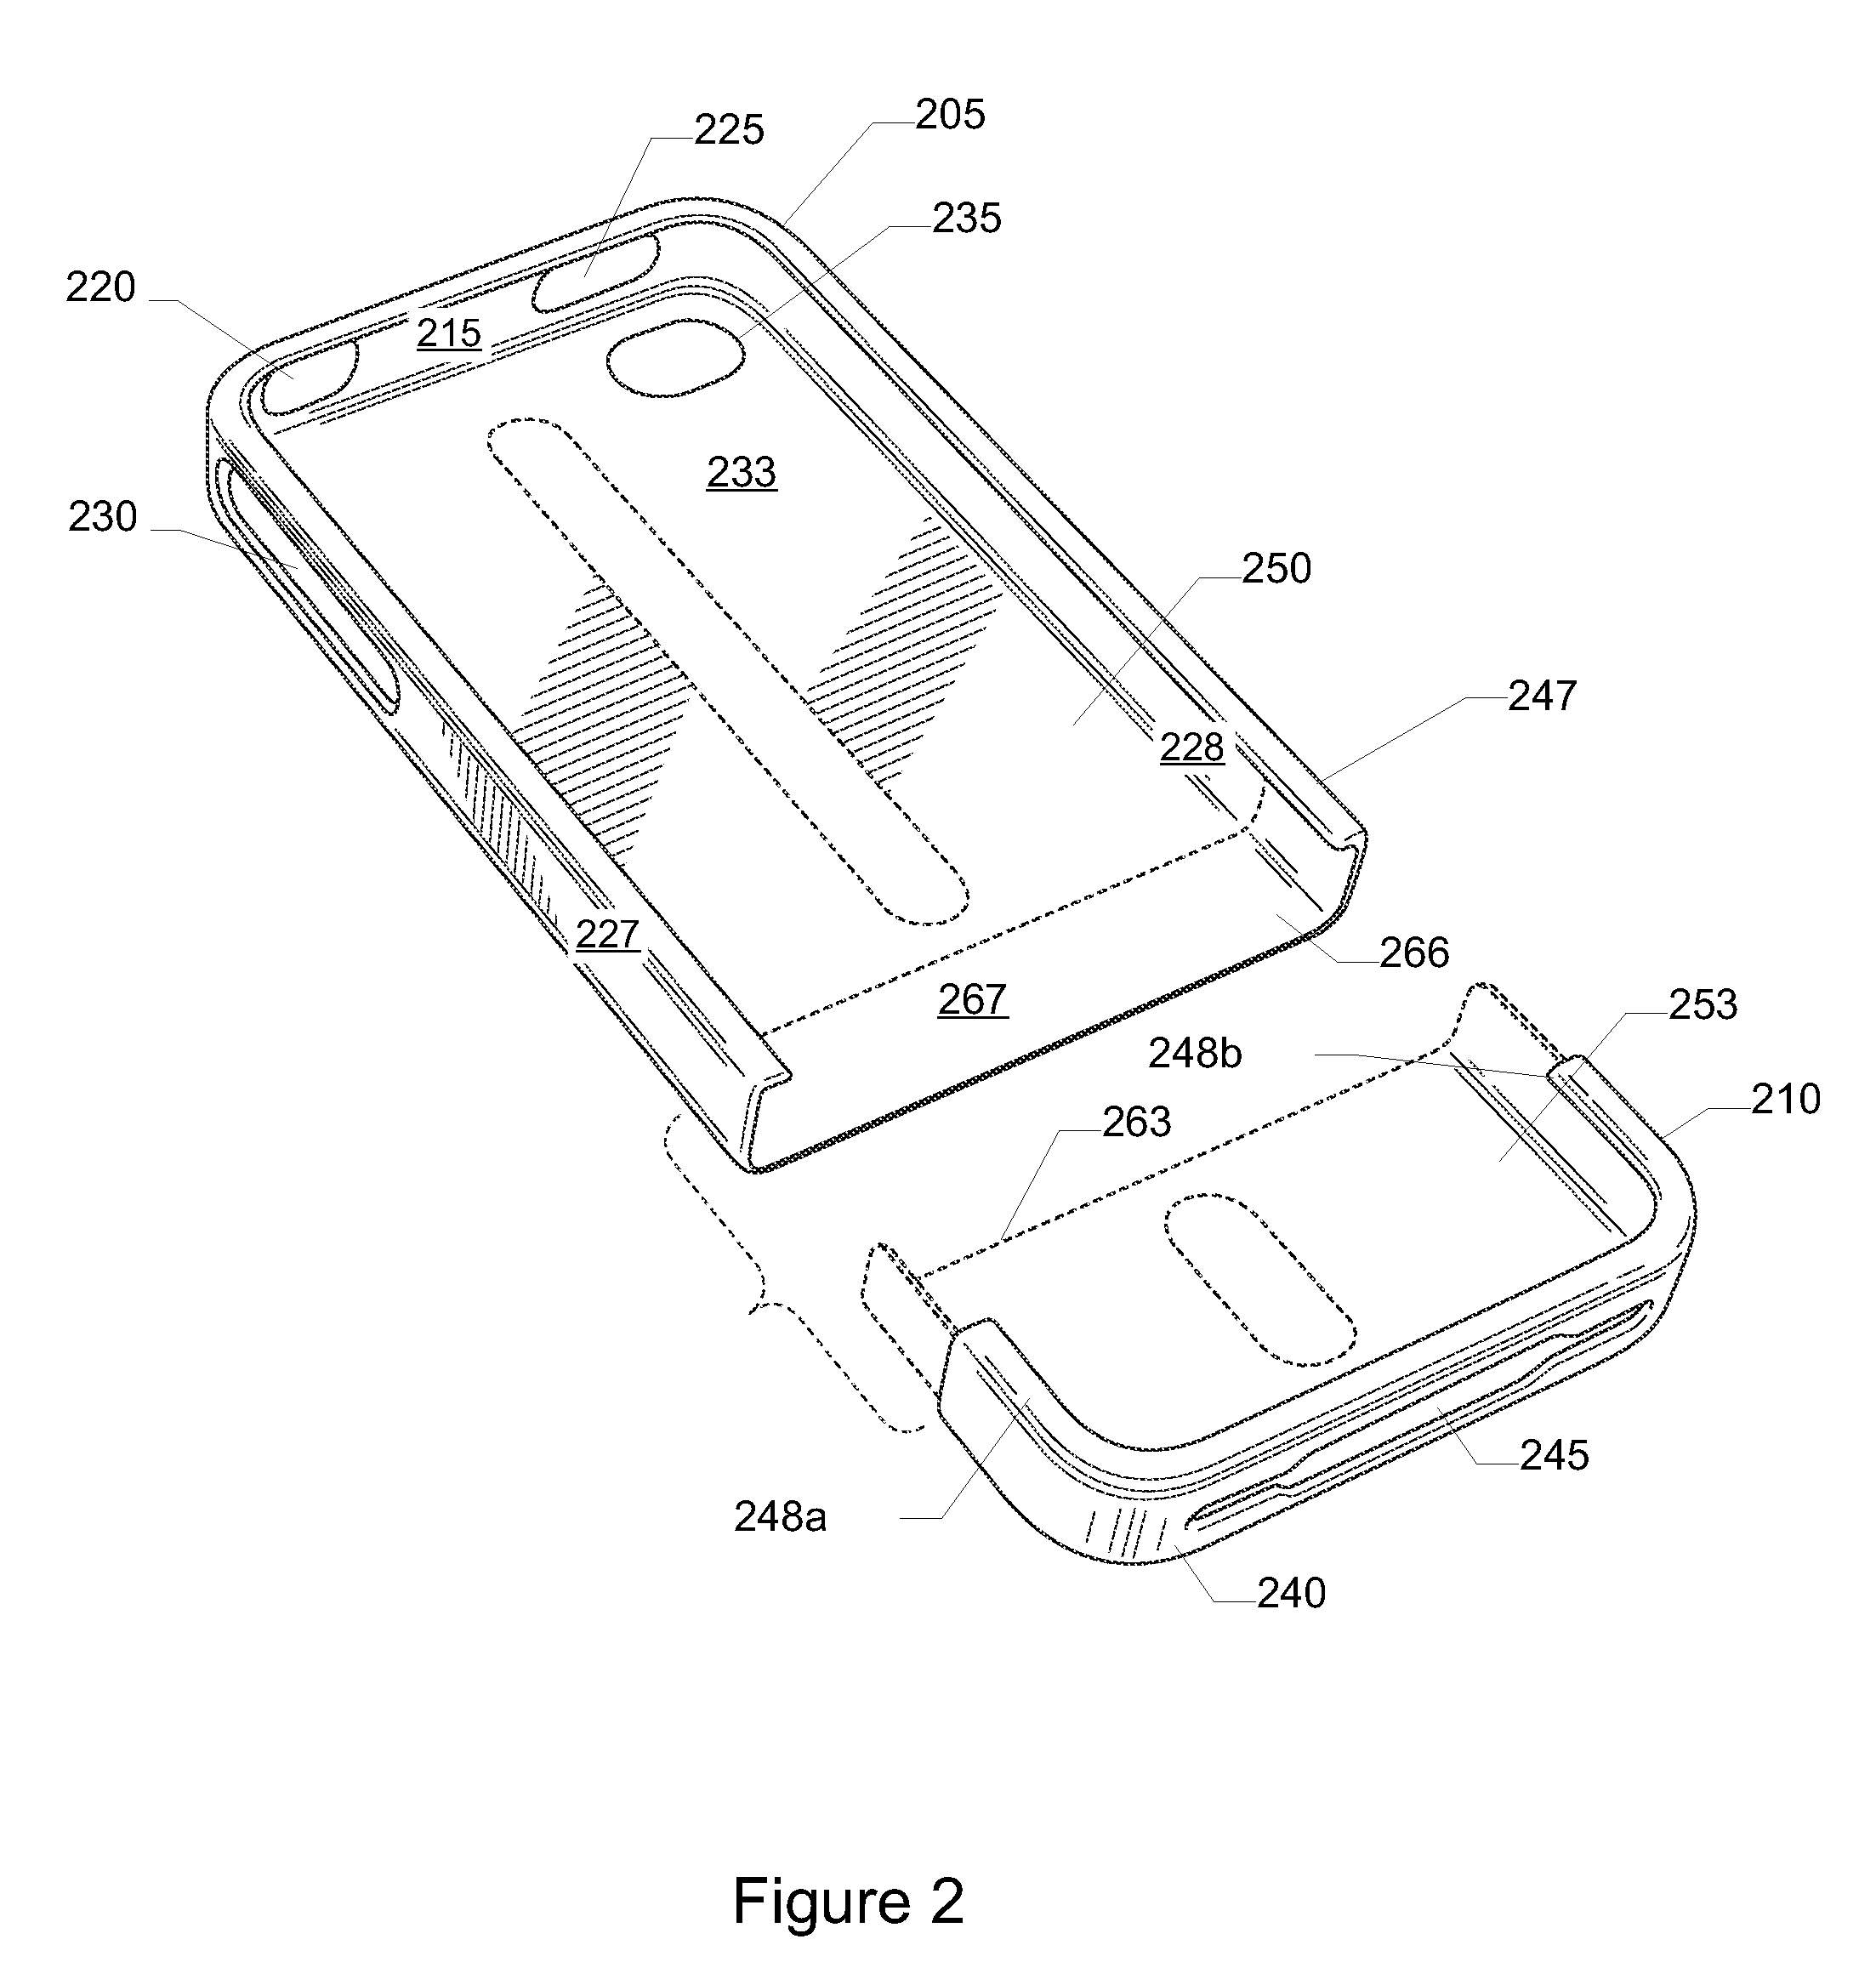 Case for Portable Electronic Device